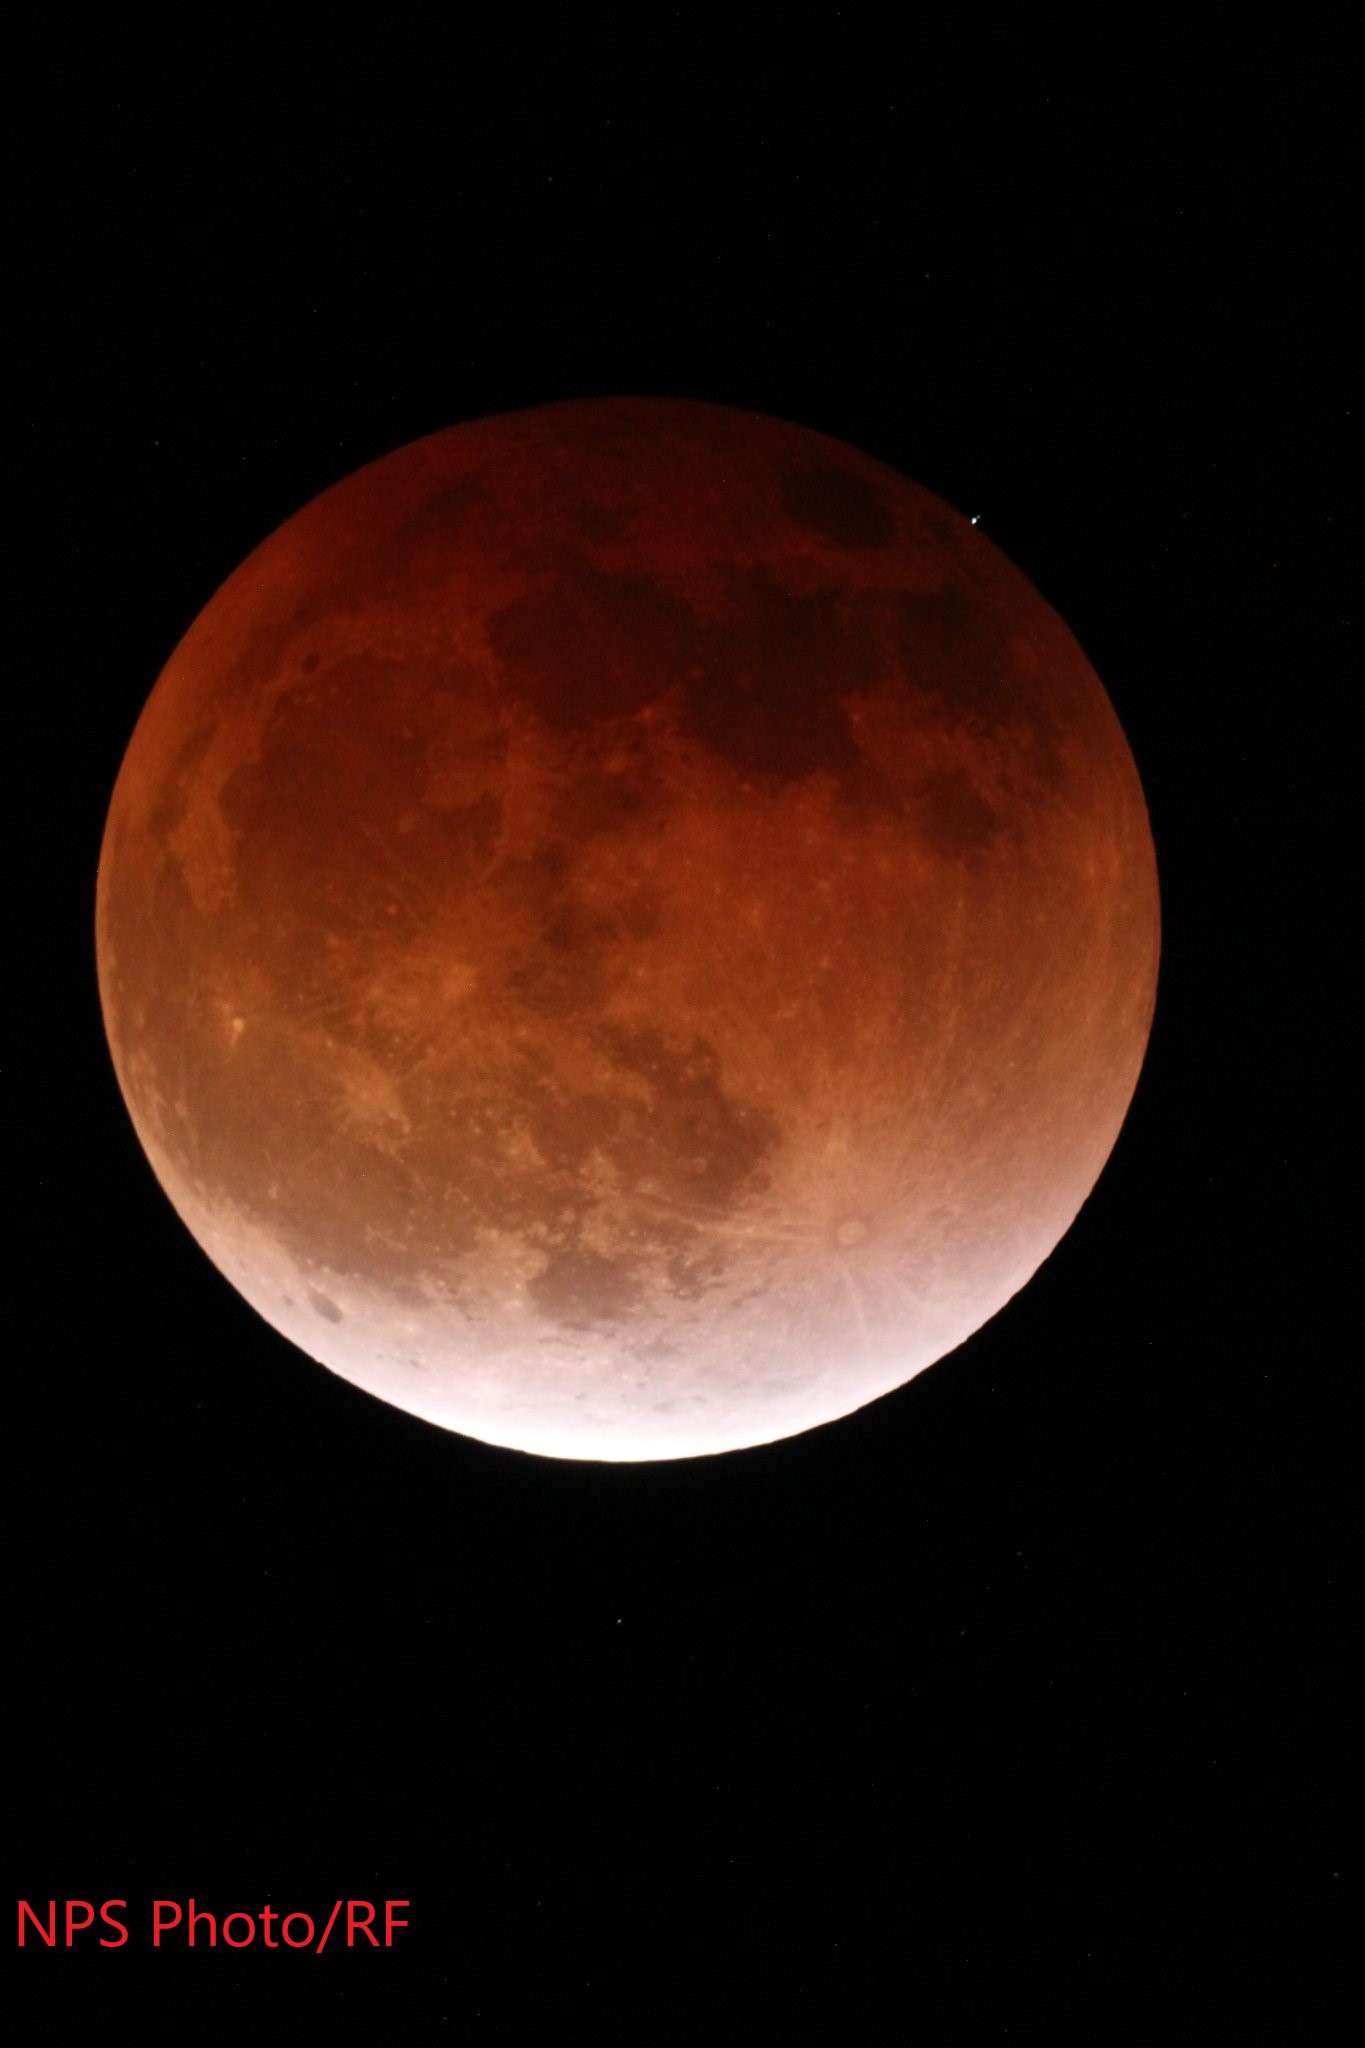 The eclipsed moon appears as an orange circle, seen against the black background of the sky.